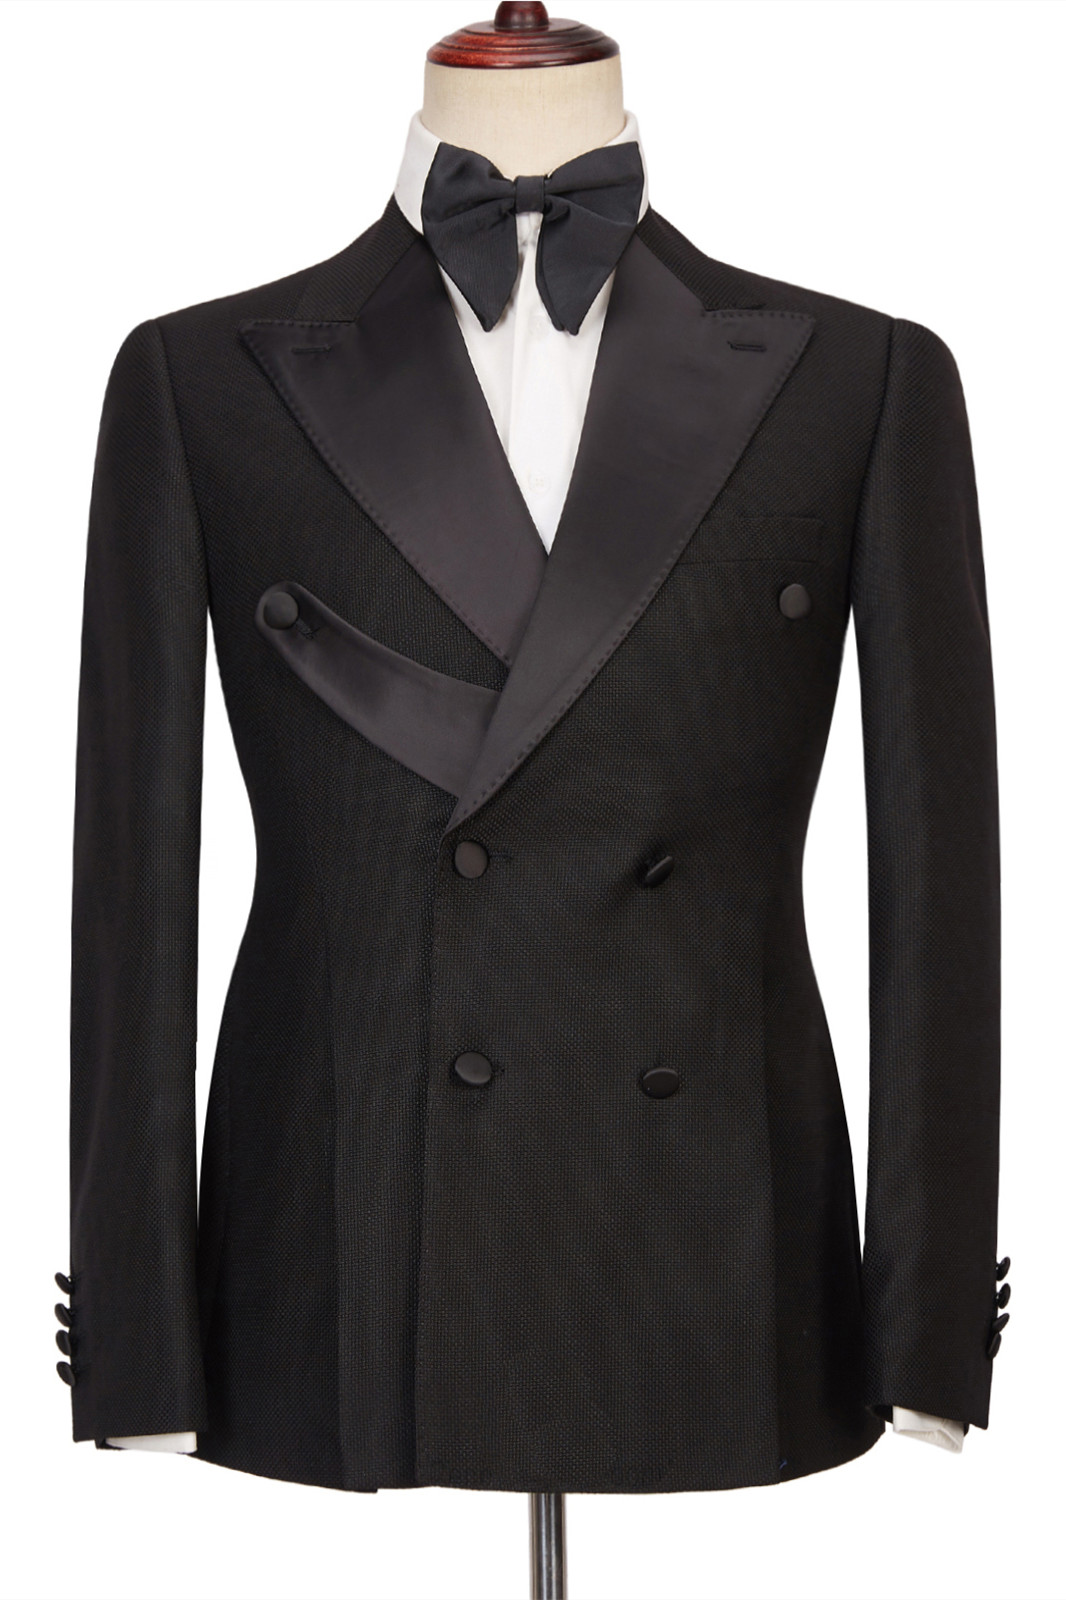 Latest Design Black Double Breasted Peaked Lapel Best Fitted Men Suits - lulusllly